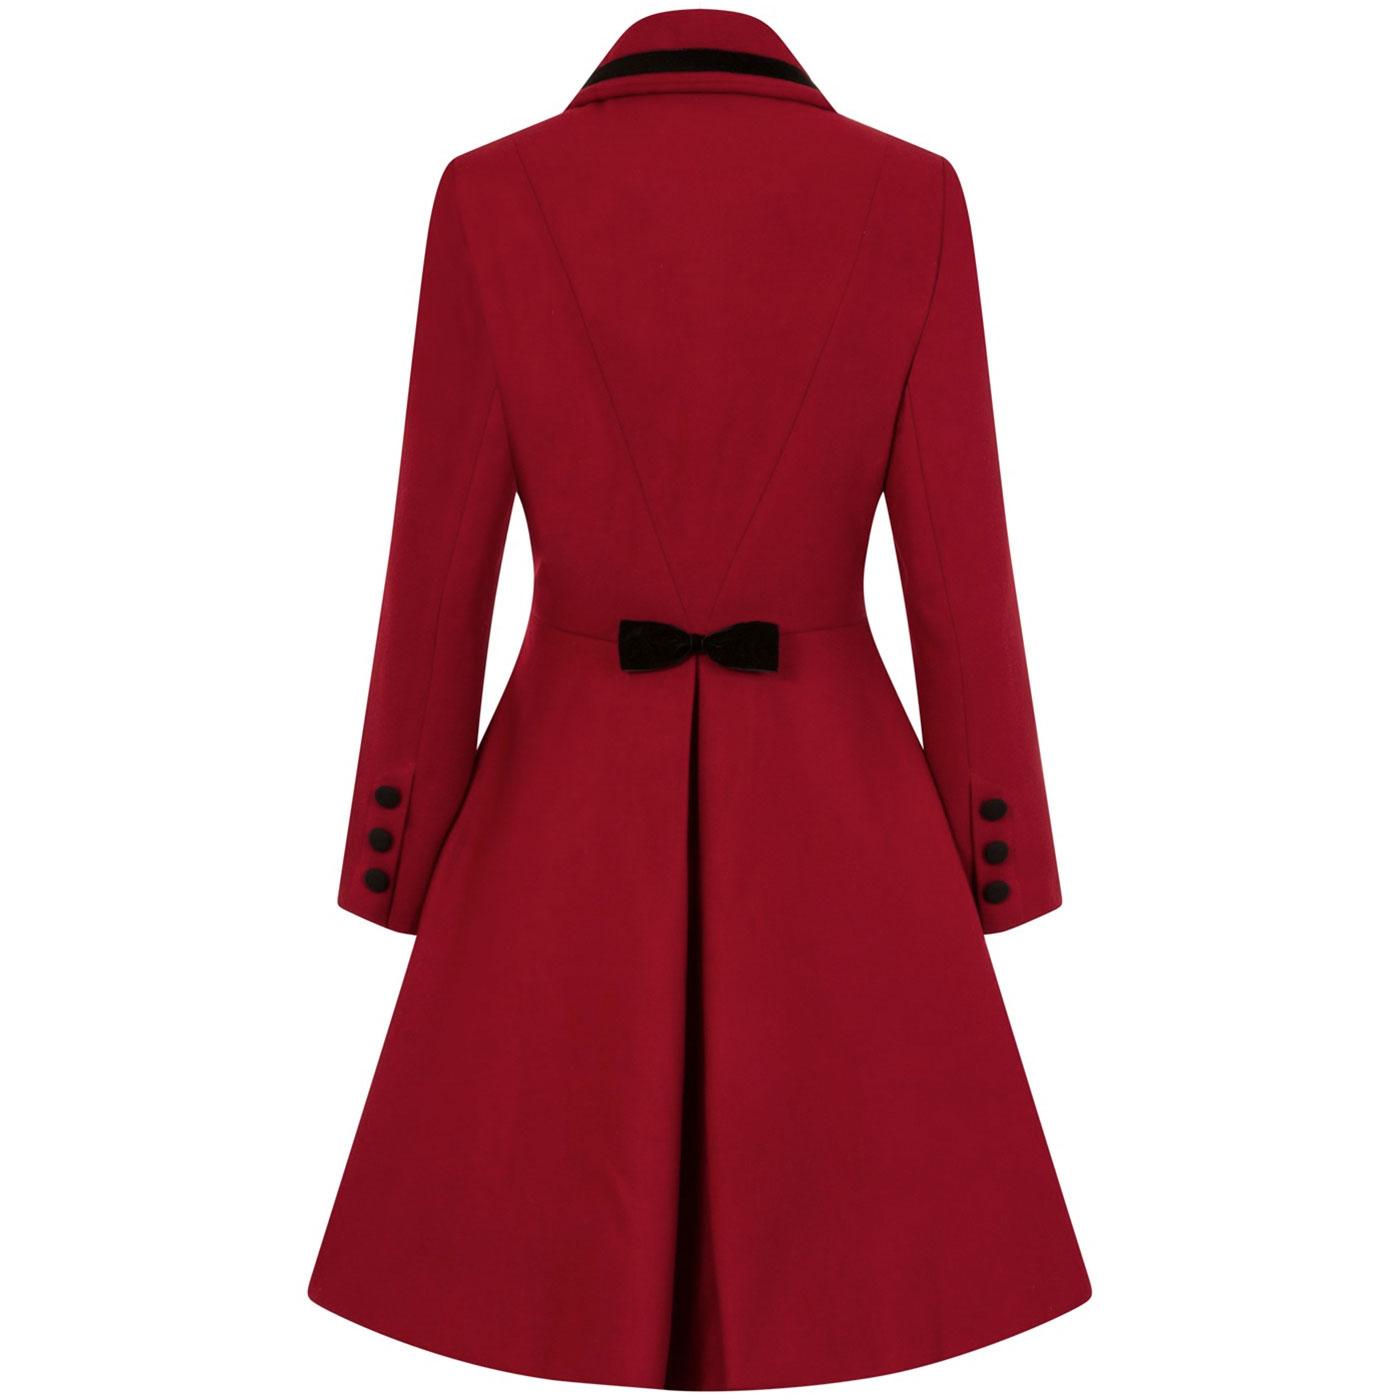 HELL BUNNY Olivia Womens Vintage 1950s Bow Coat Red